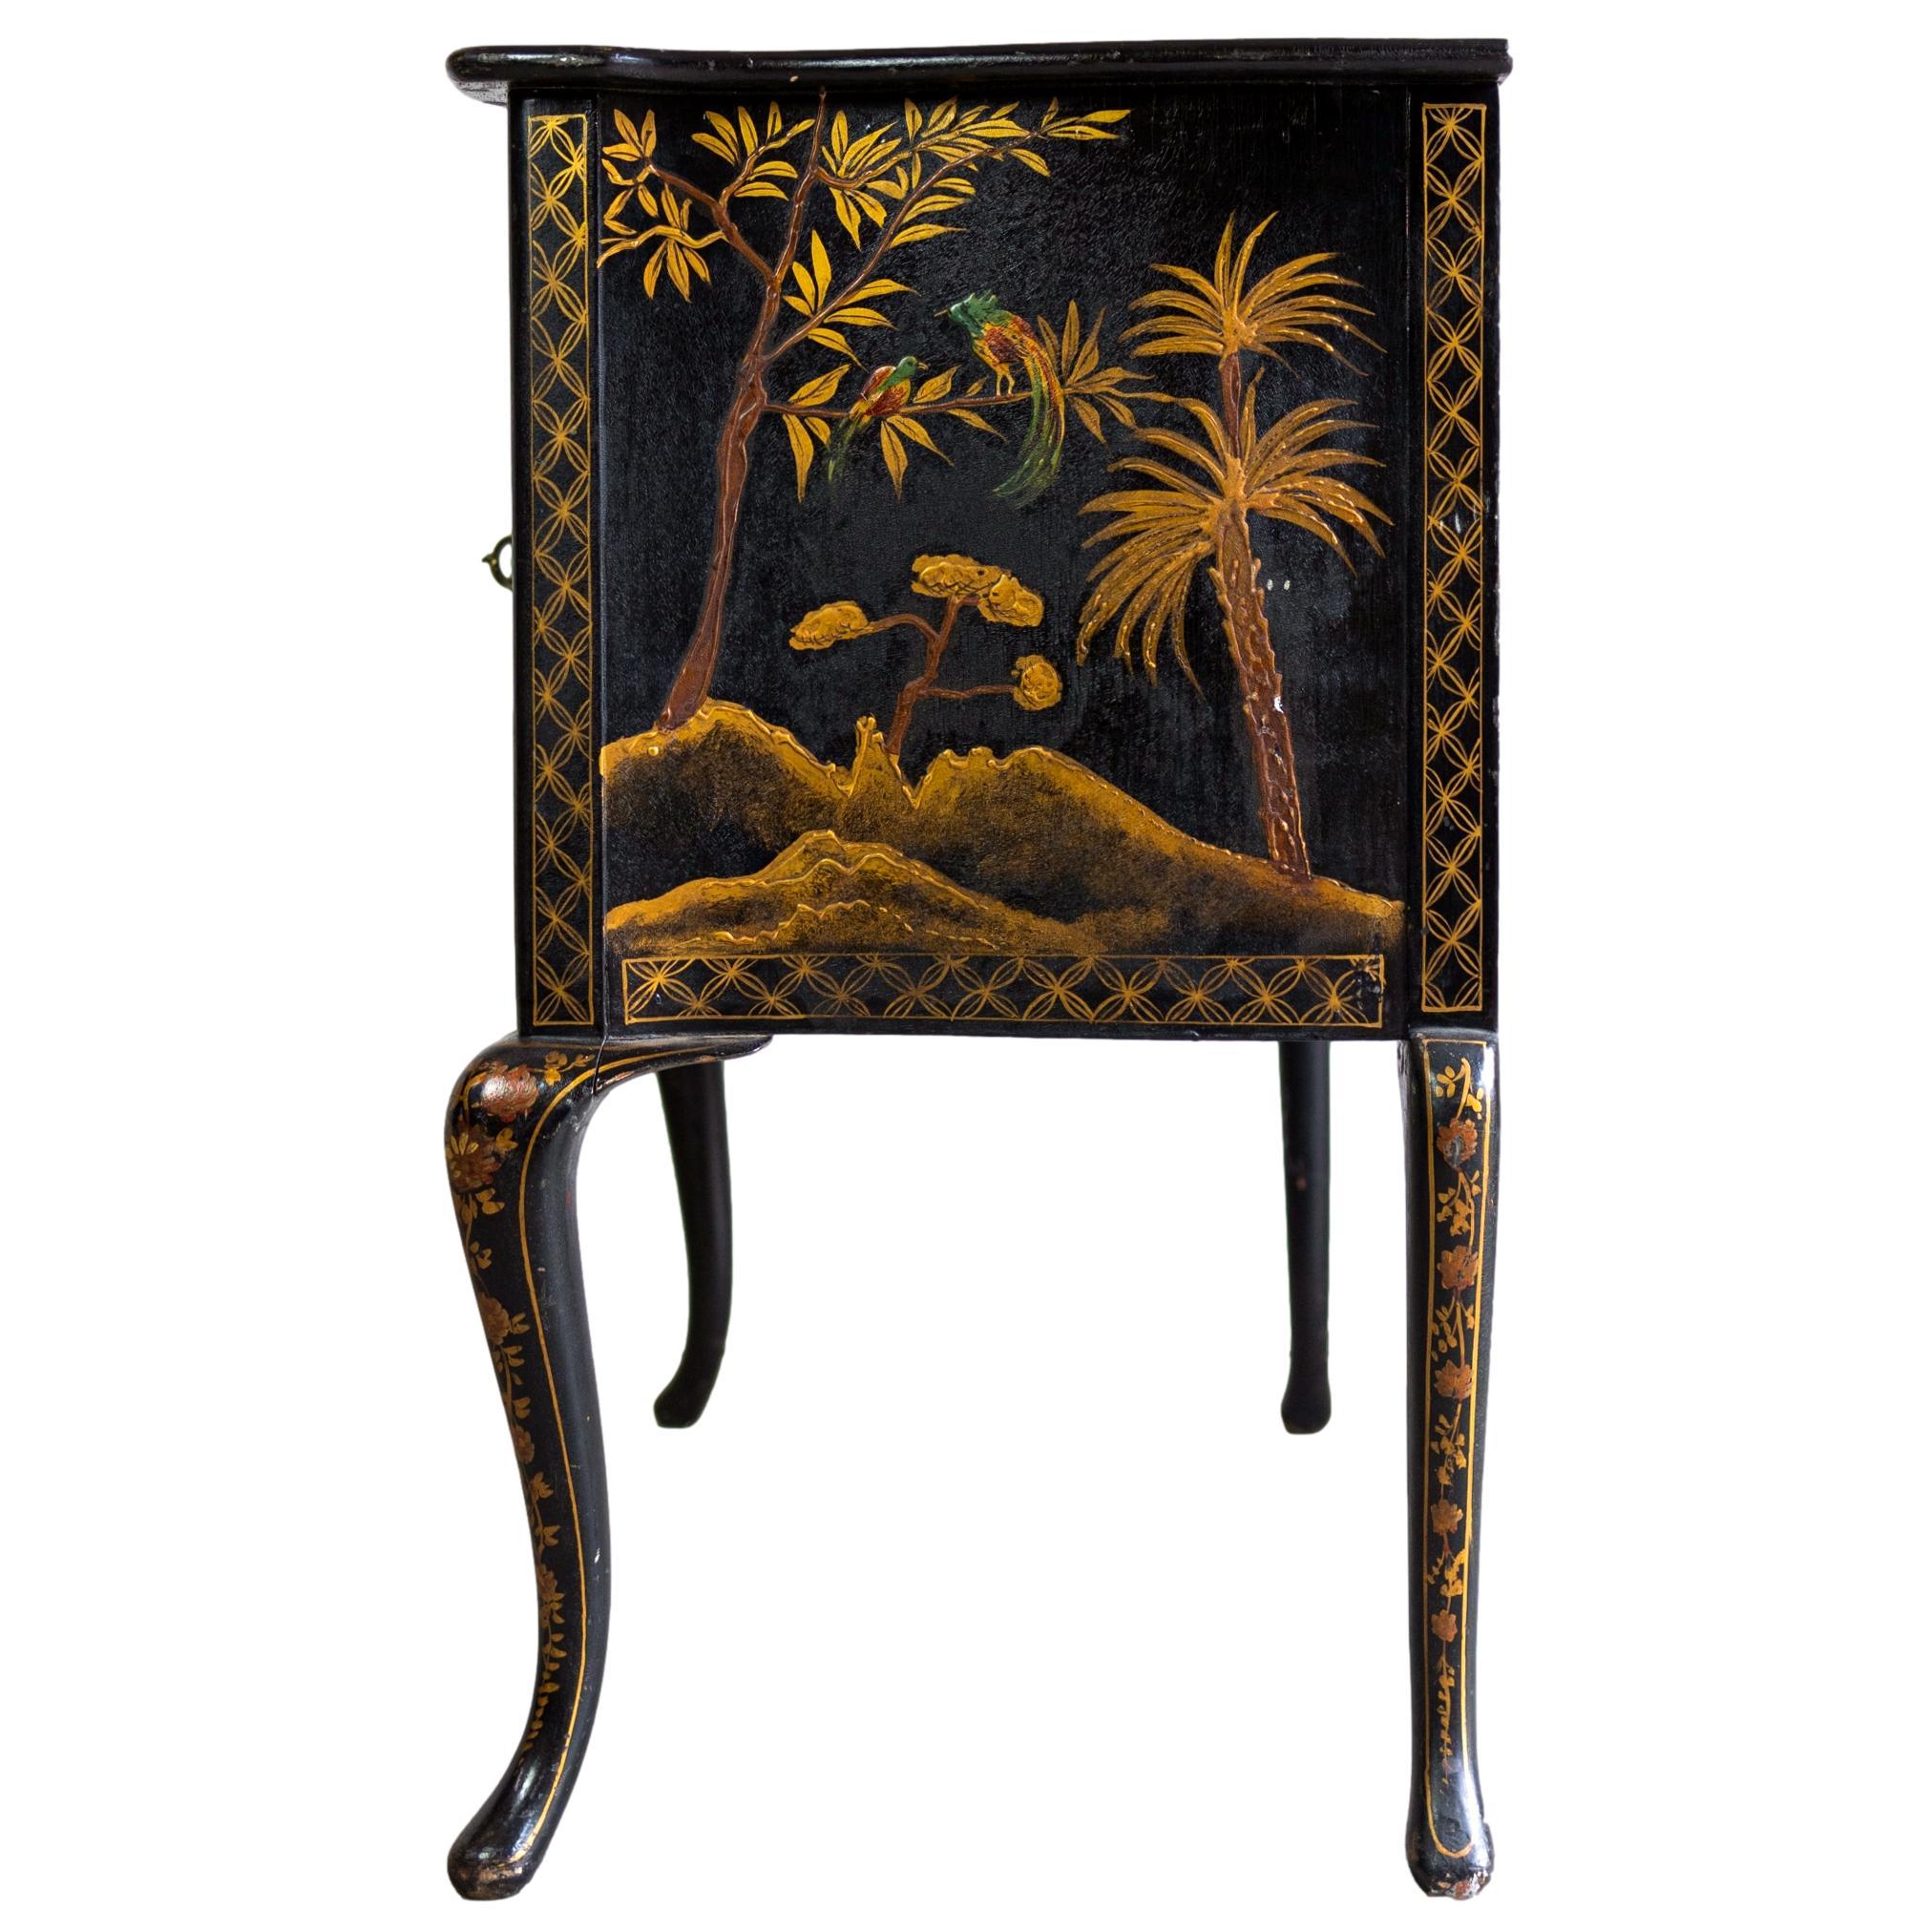 19th Century Black Lacquered and Chinoiserie-Decorated Serpentine Cabinet, English, c. 1875